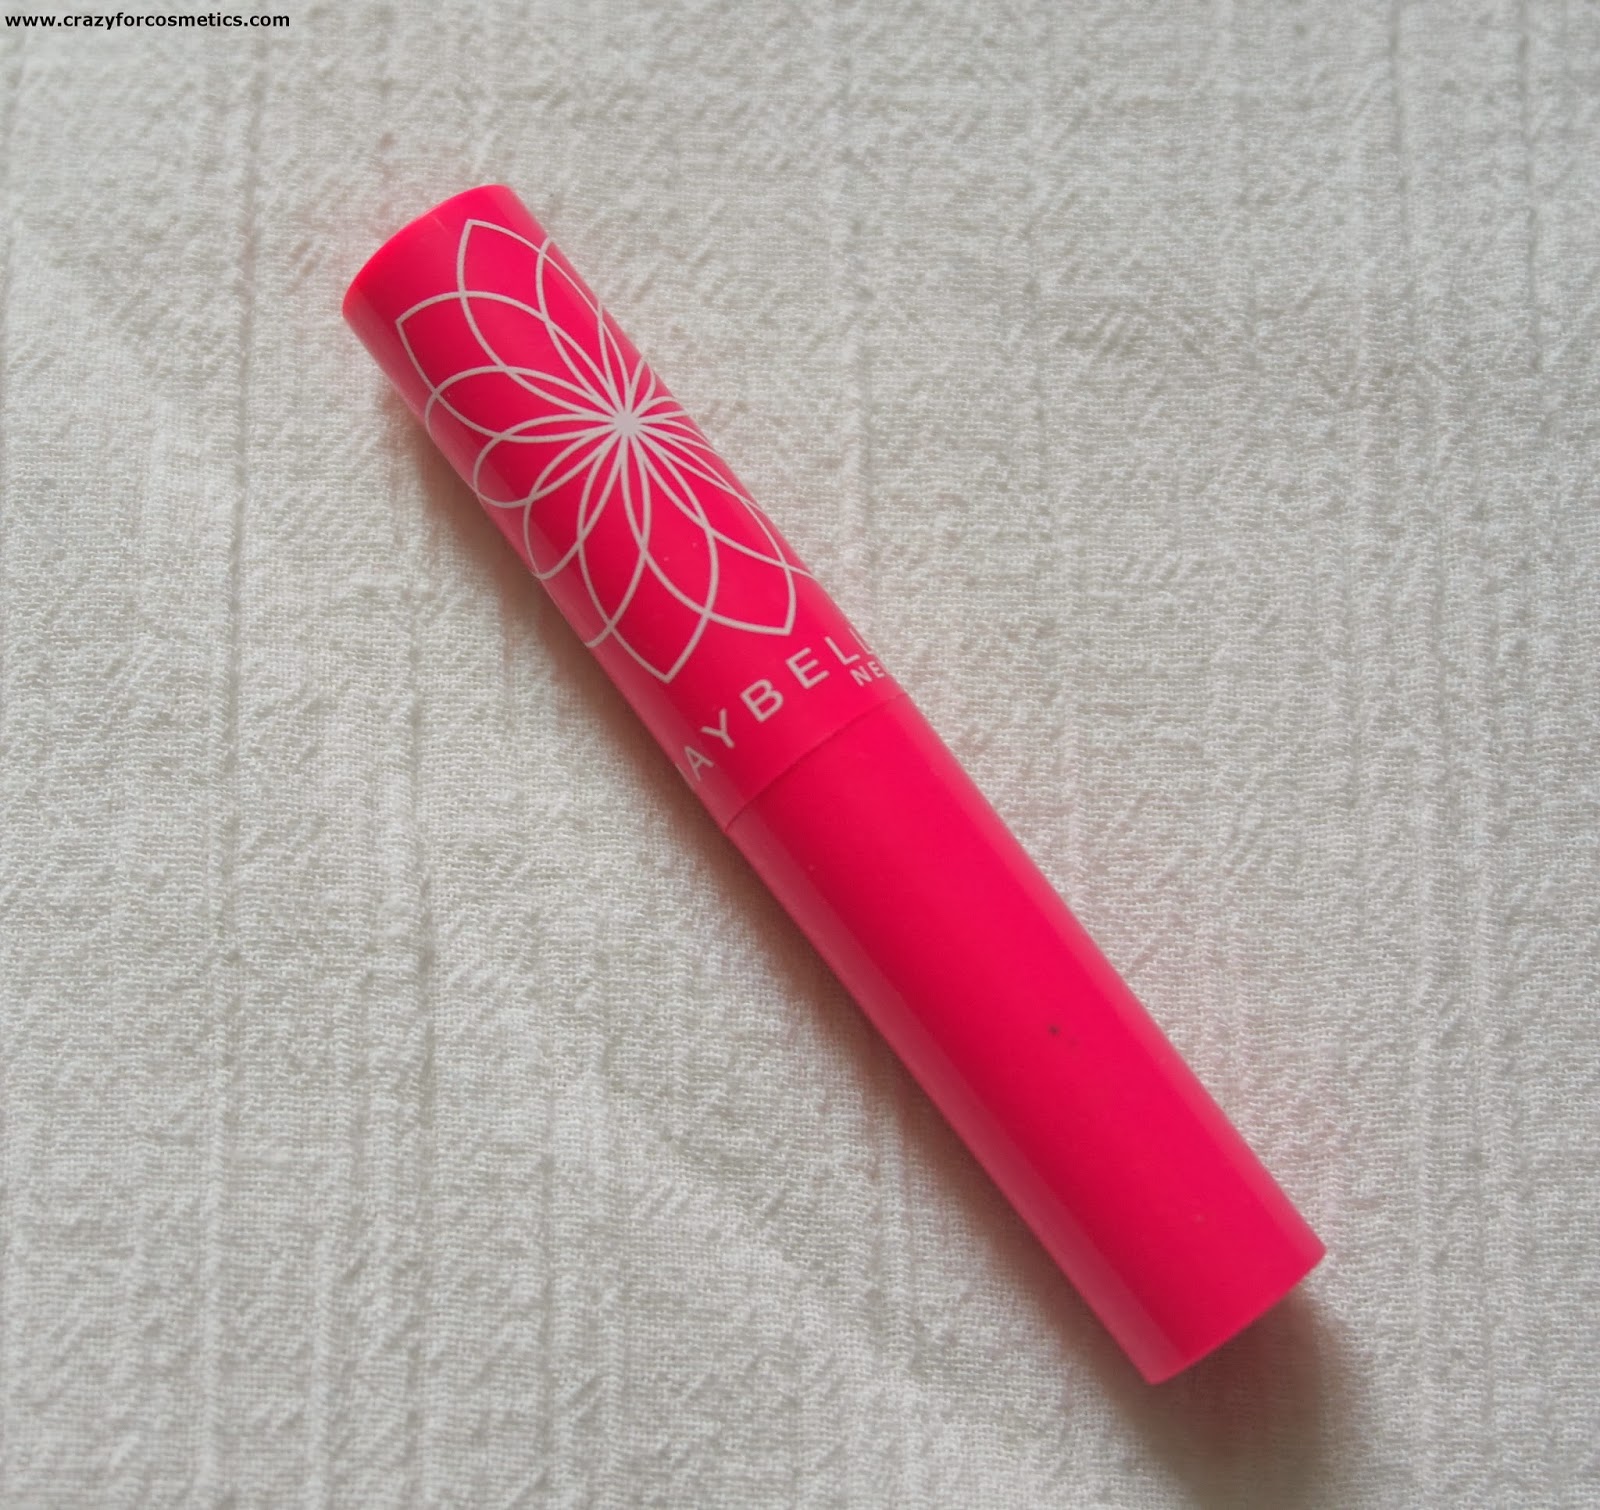 Maybelline Color Bloom Lipbalm in Pink Blossom review & swatches